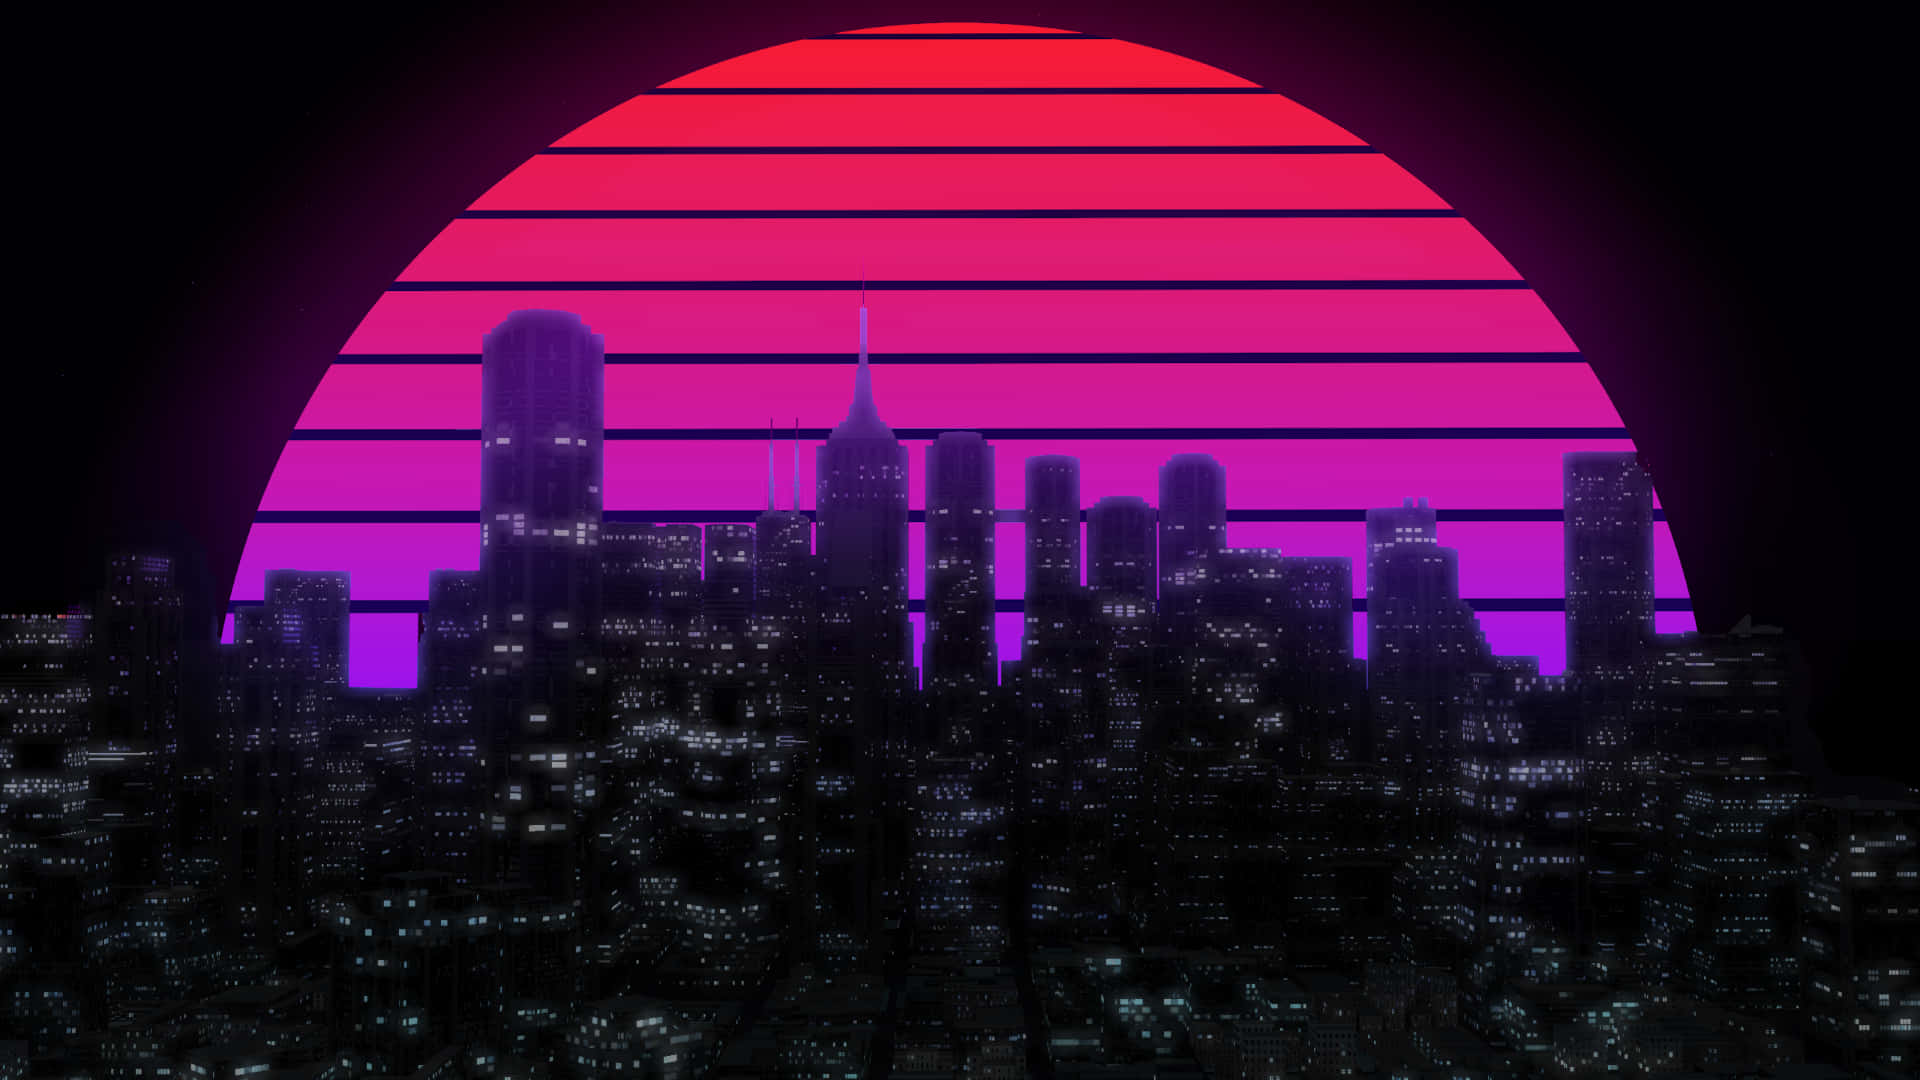 Free Synthwave City Wallpaper Downloads, [100+] Synthwave City Wallpapers  for FREE 